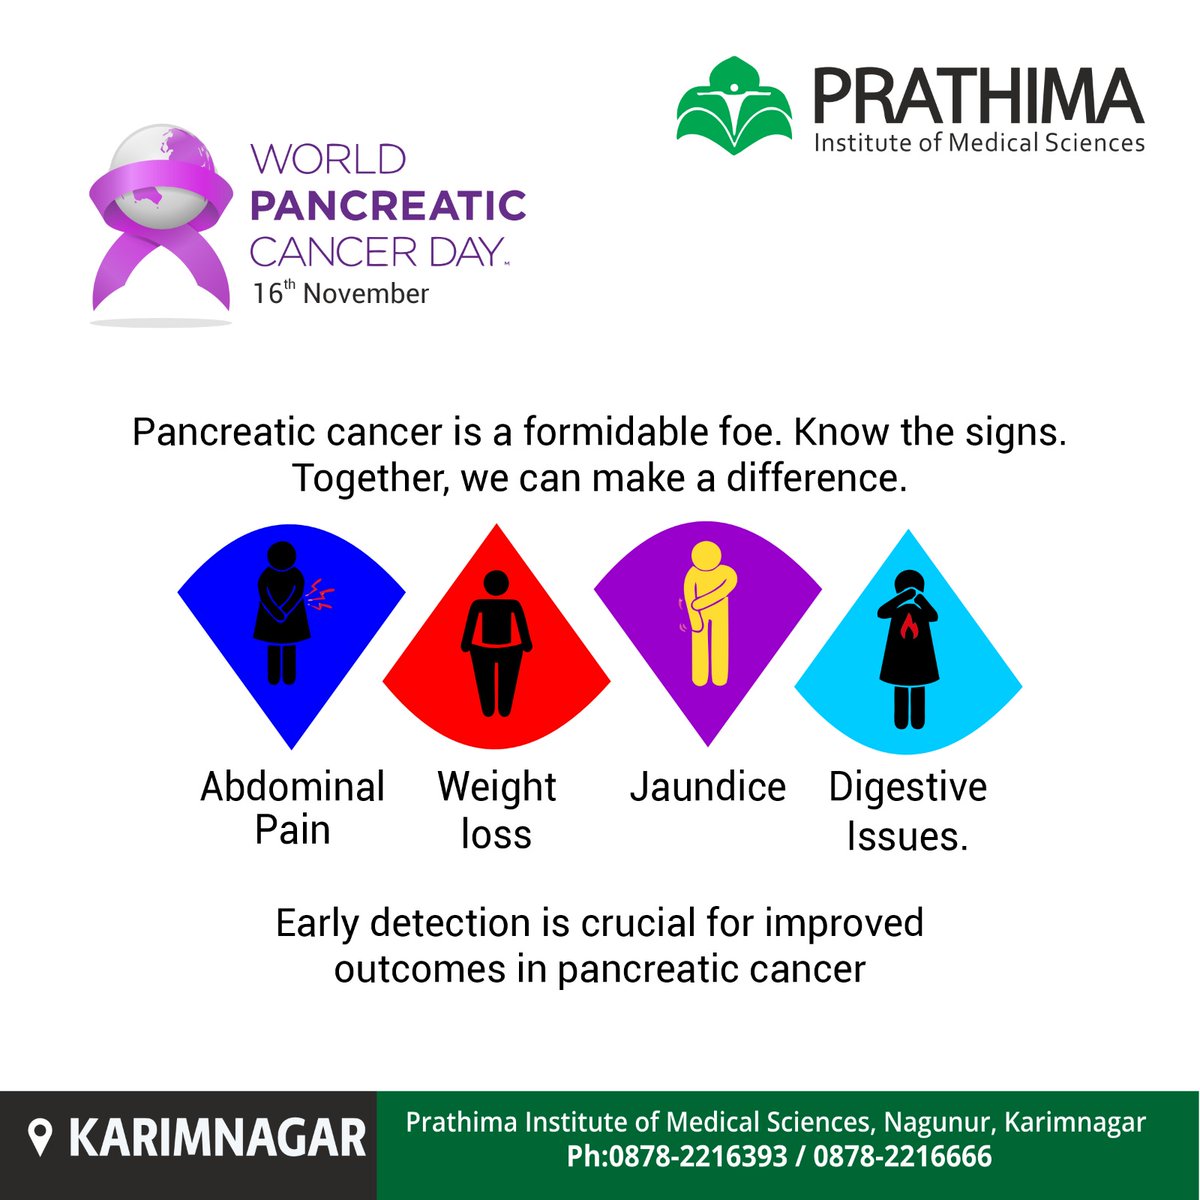 Pancreatic cancer is a formidable foe. Know the signsfor Early Detection

#WorldPancreaticCancerDay #DemandBetter #PancreaticCancerAwareness #WageHope #PurpleHope #PancreaticCancerWarriors  #FightPancreaticCancer #EarlyDetectionSavesLives #prathimainstituteofmedicalsciences #PIMS